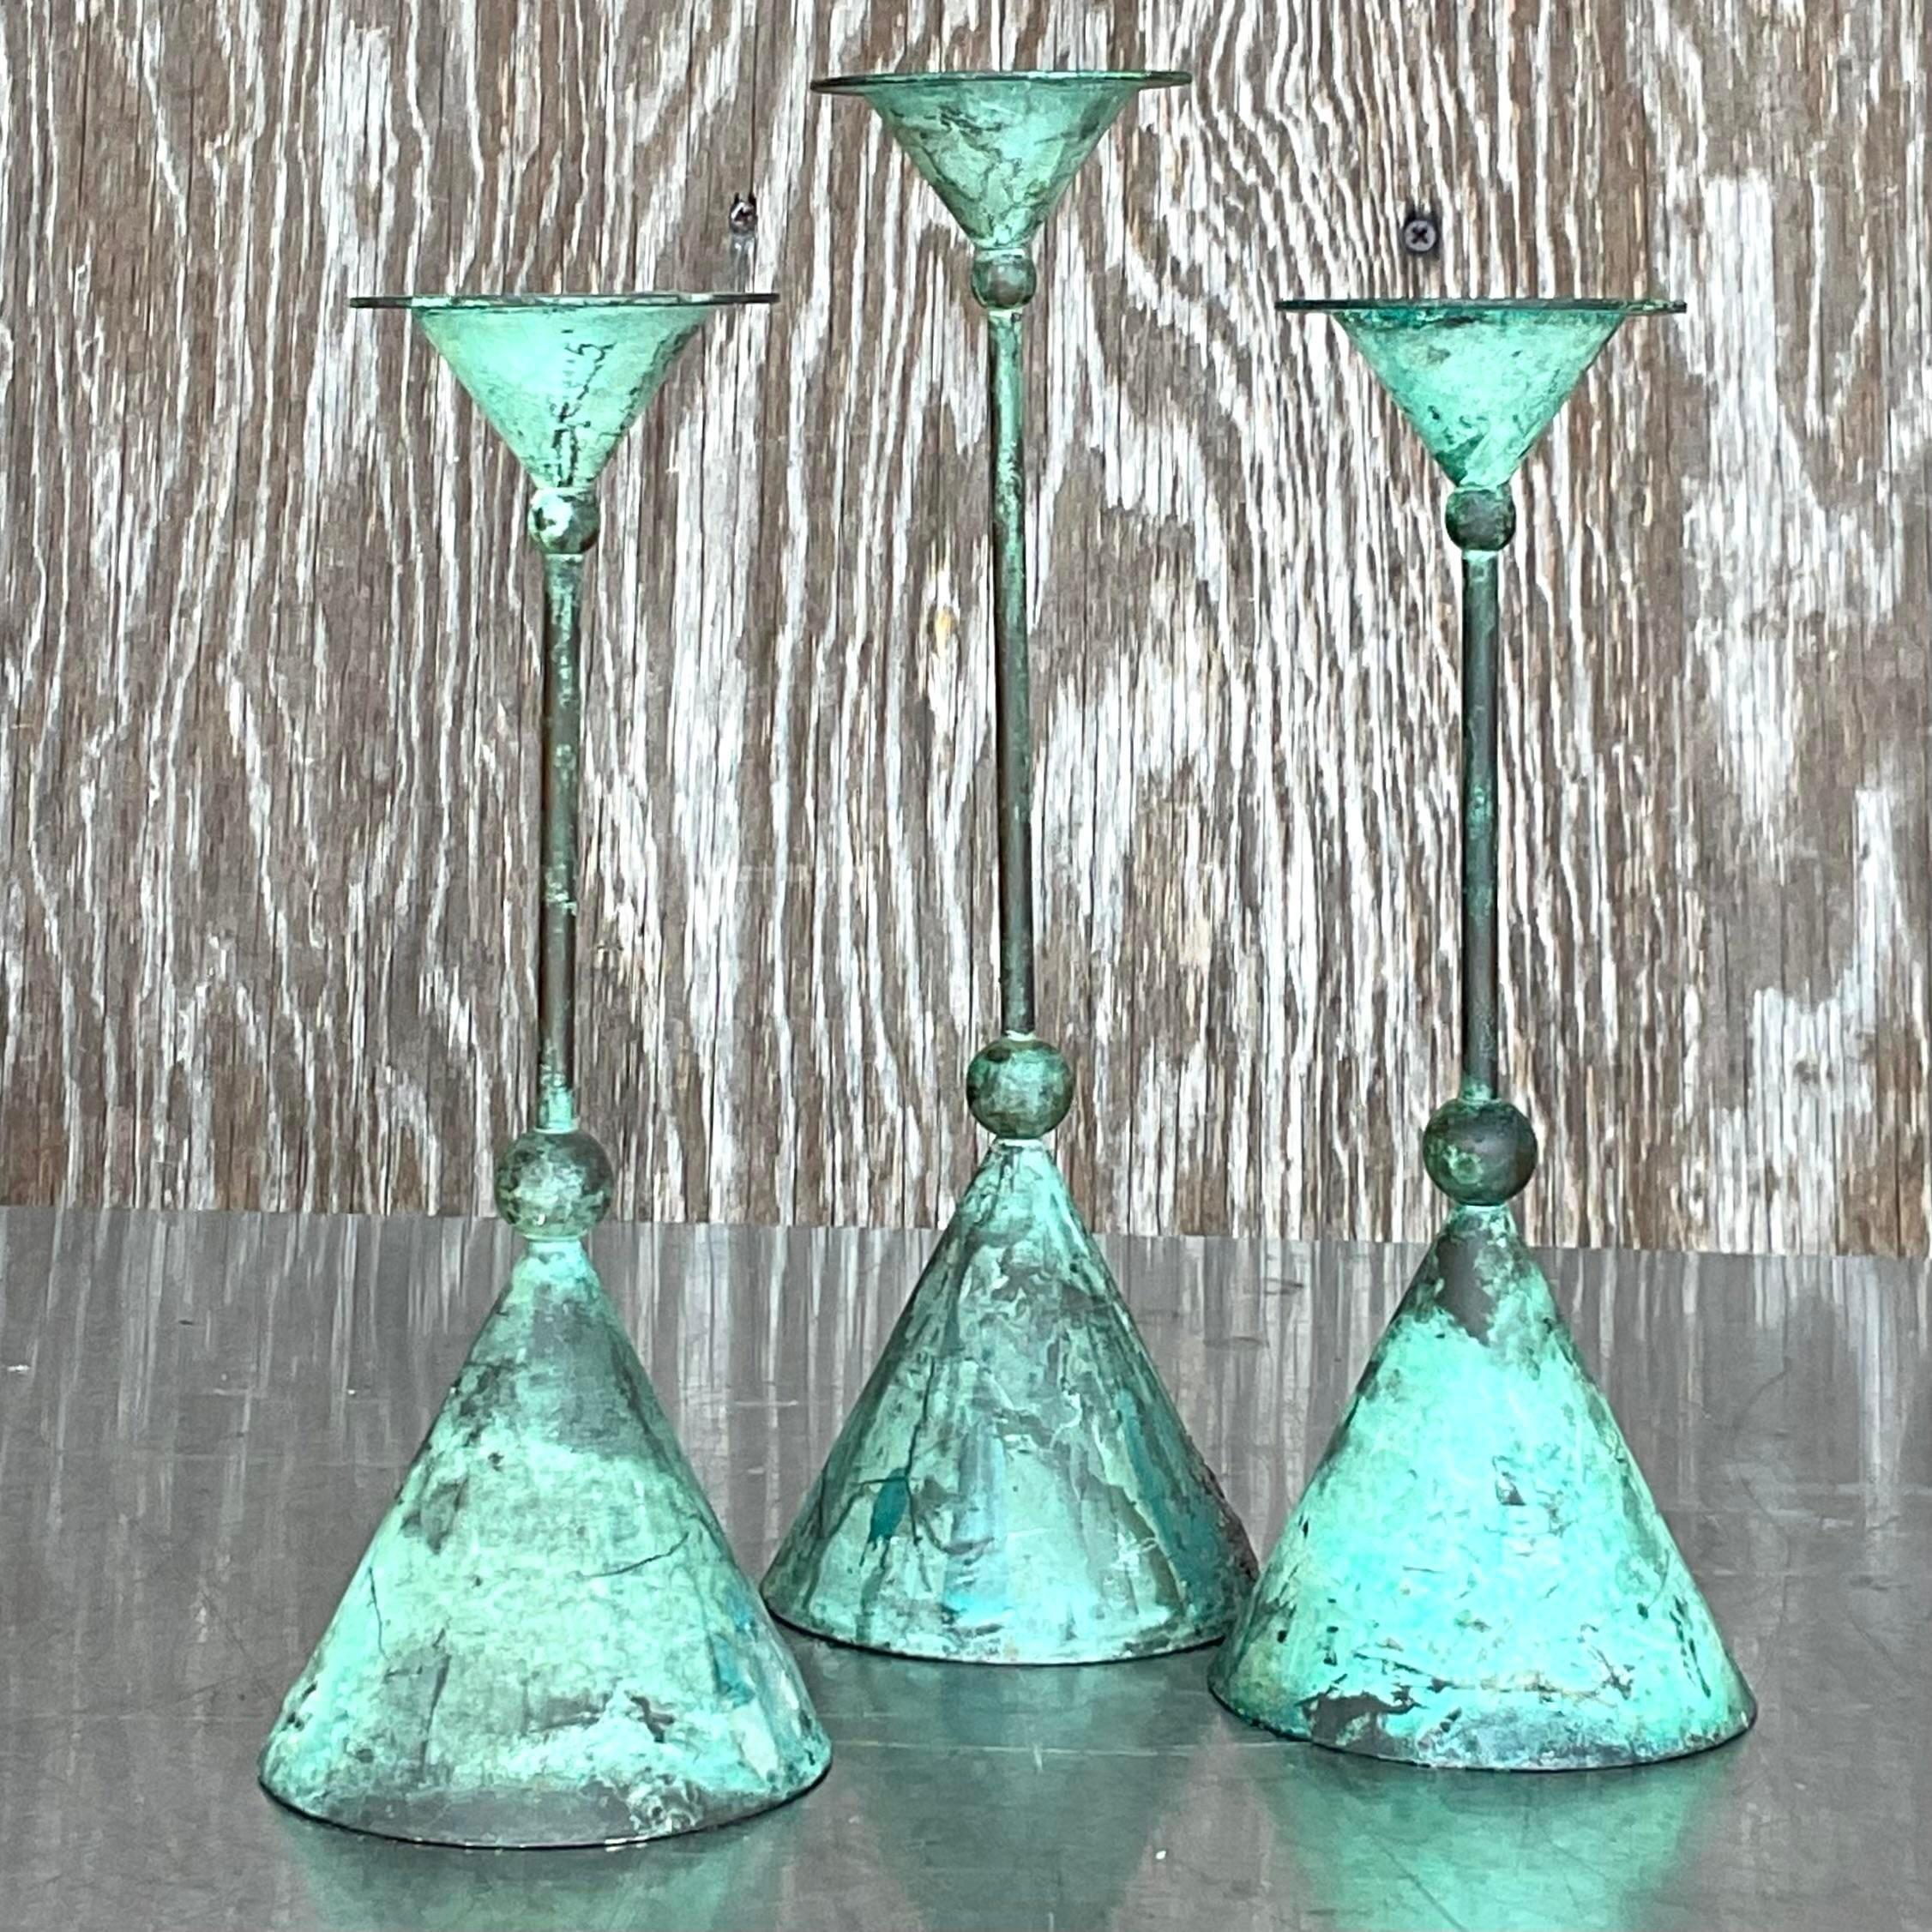 A fantastic set of three vintage Boho bronze candlesticks. A chic Postmodern style in a beautiful verdigris finish from time. Acquired from a Palm Beach estate.

Smaller pair is 9.5h